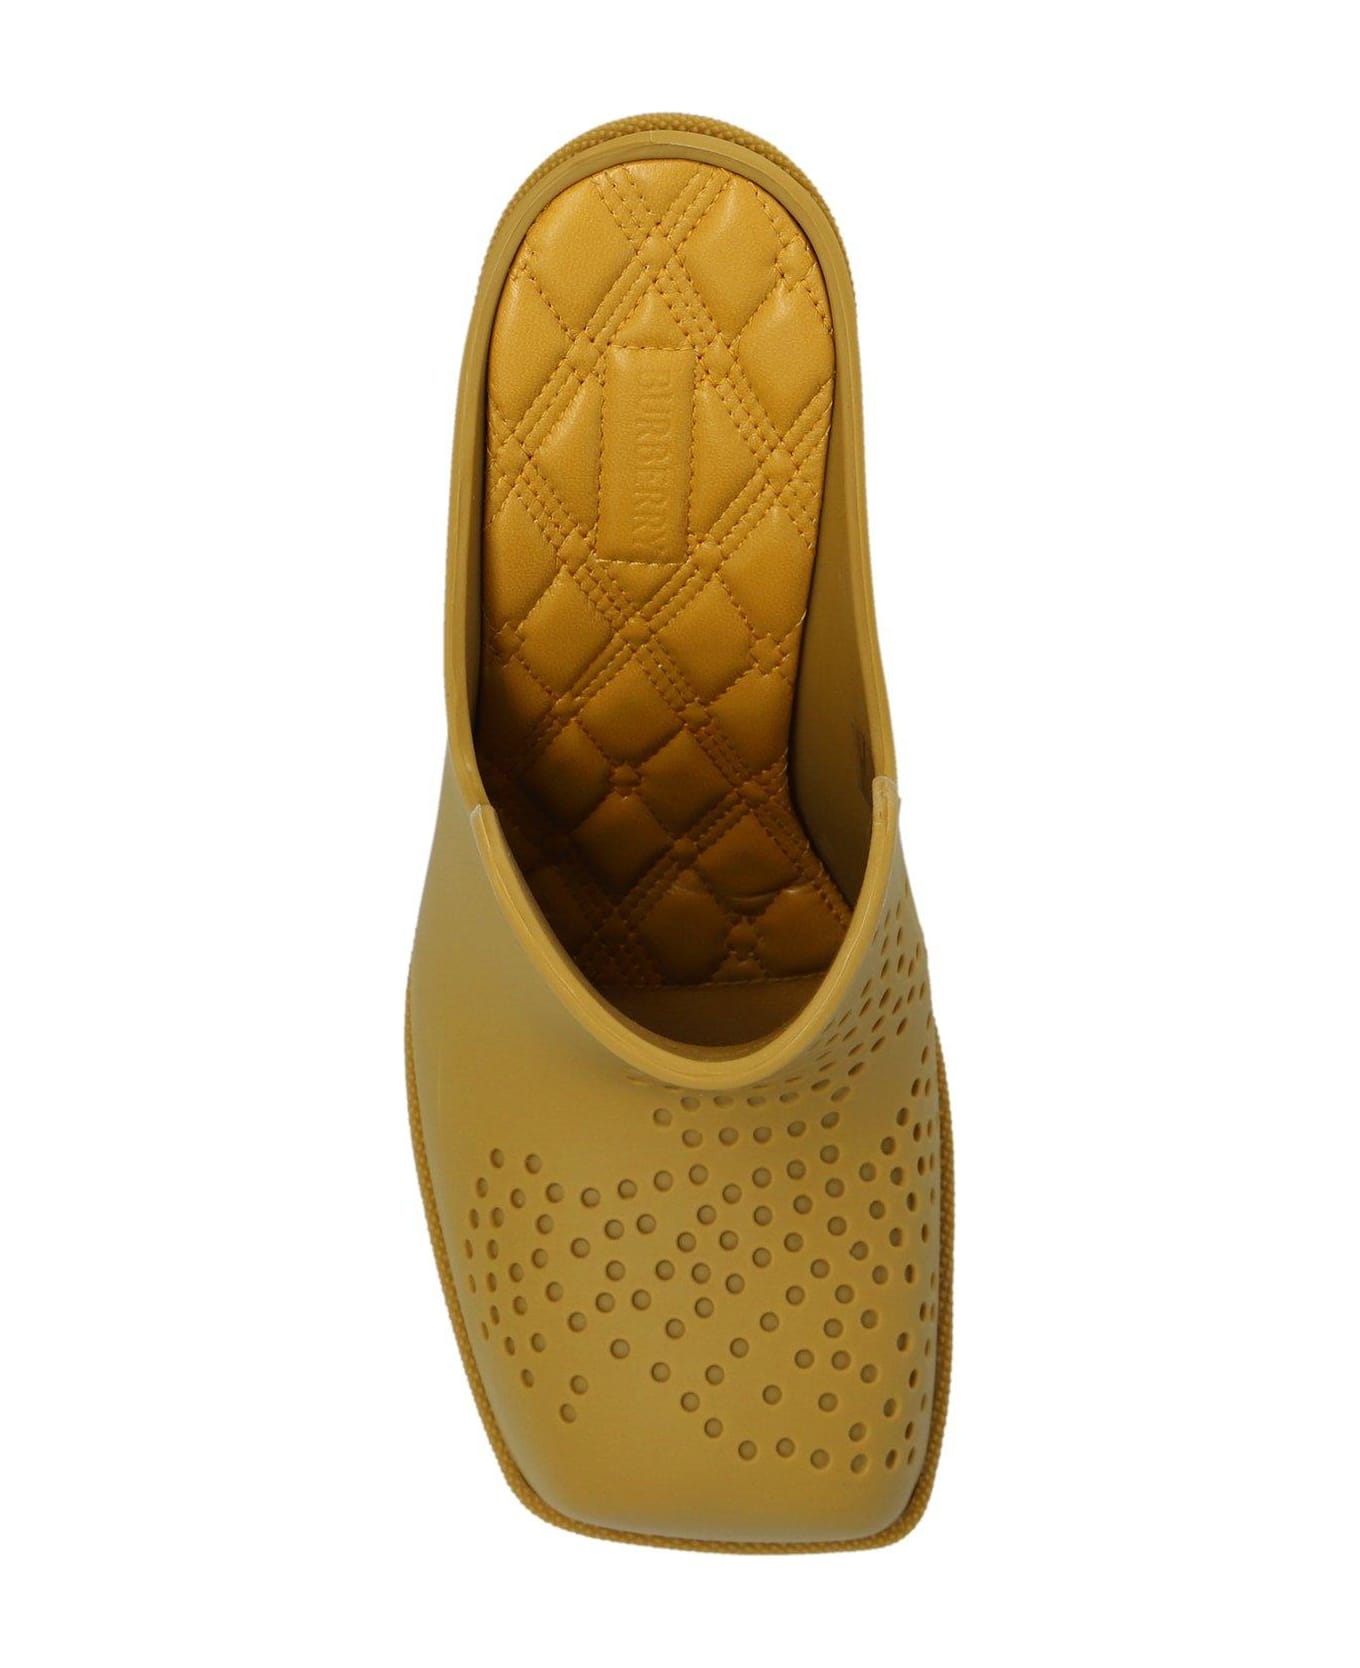 Burberry Highland Perforated Detailed Mules - YELLOW